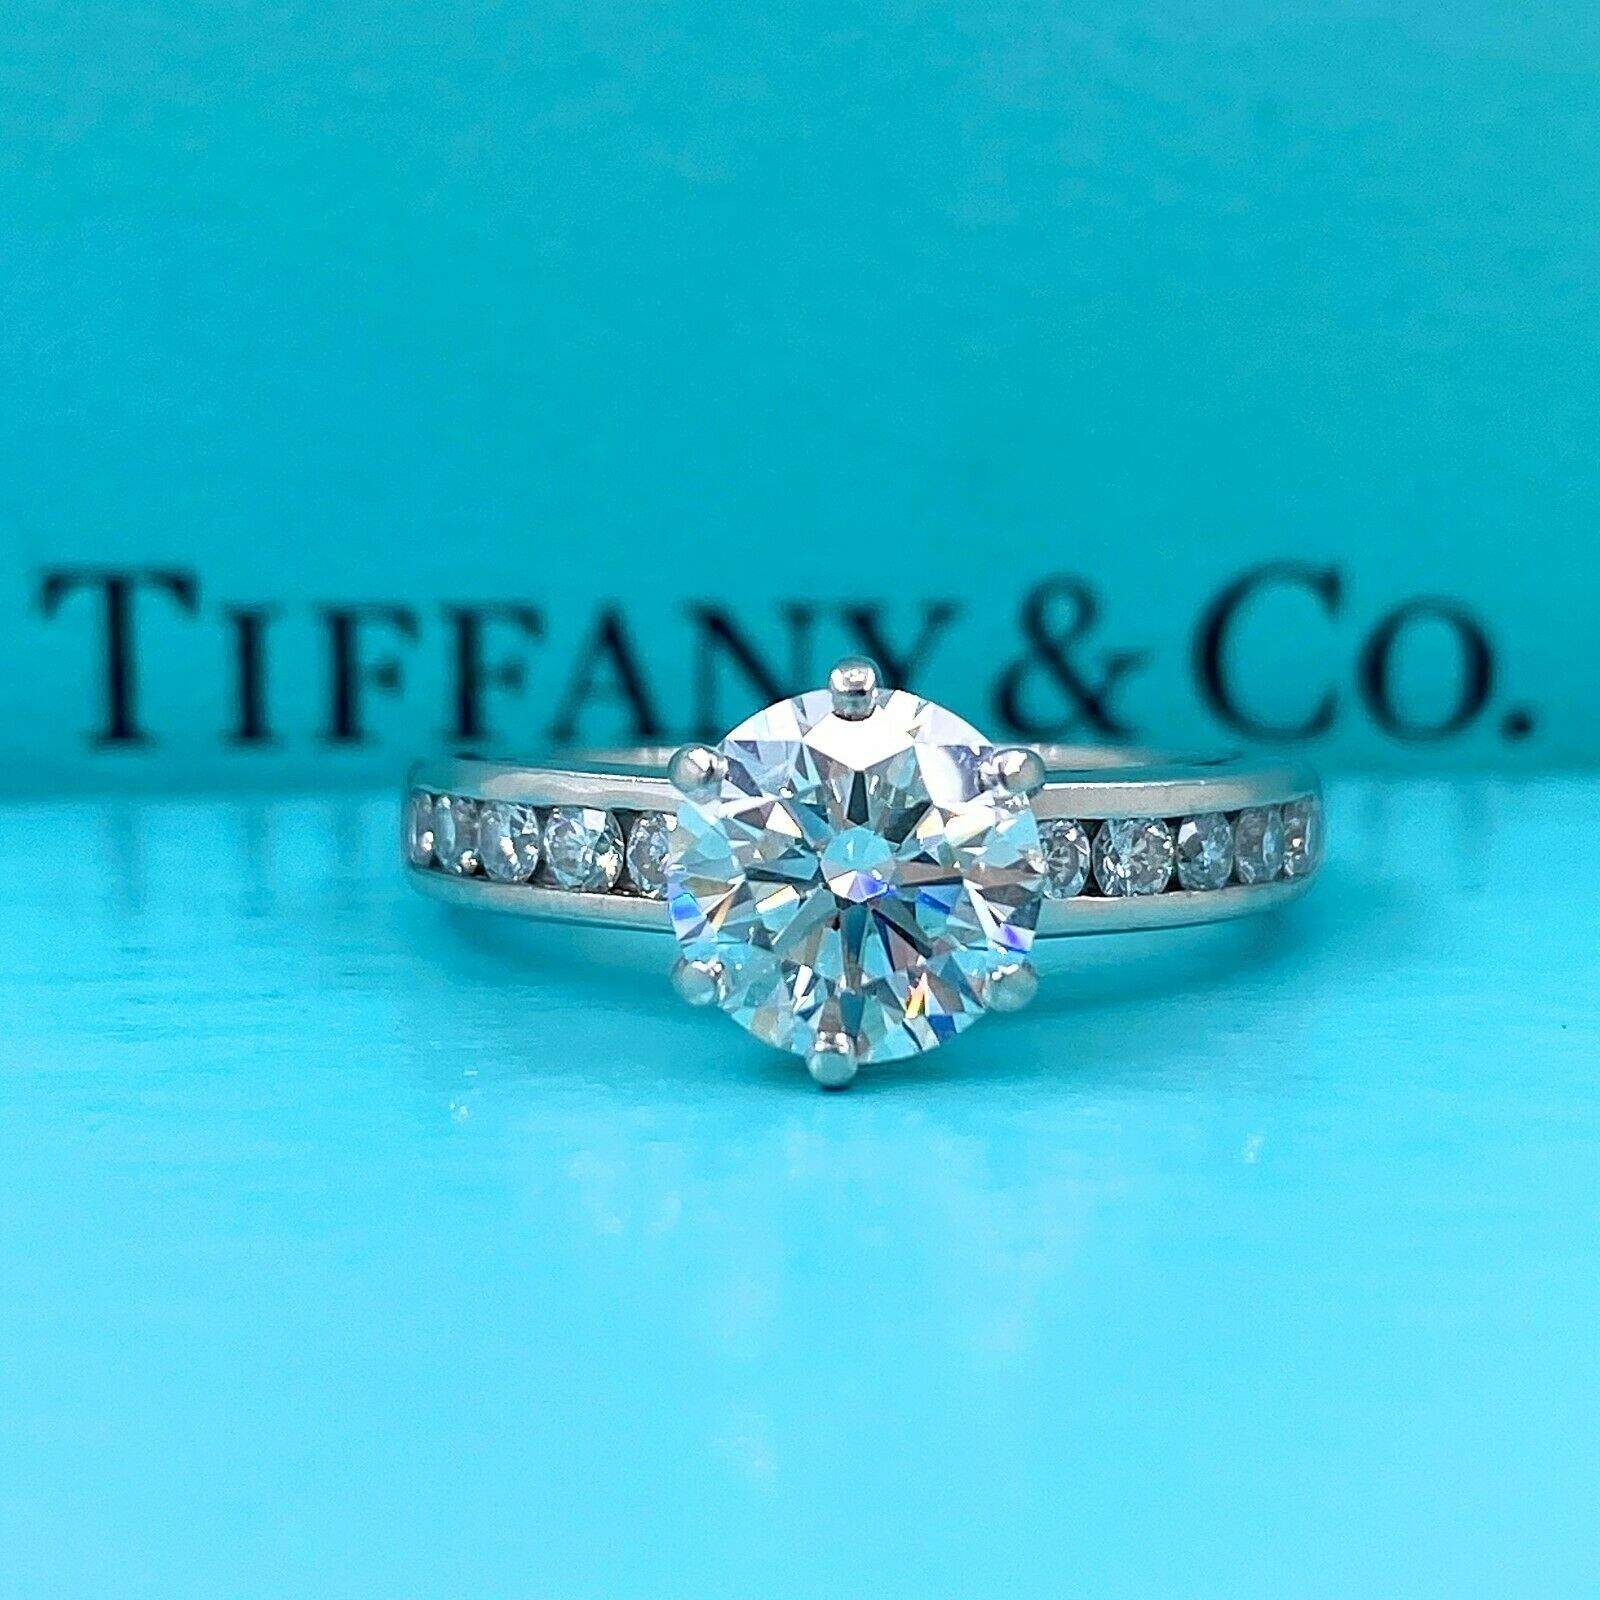 92 CARAT TIFFANY & CO DIAMOND SOLITAIRE ENGAGEMENT RING – Erstwhile Jewelry